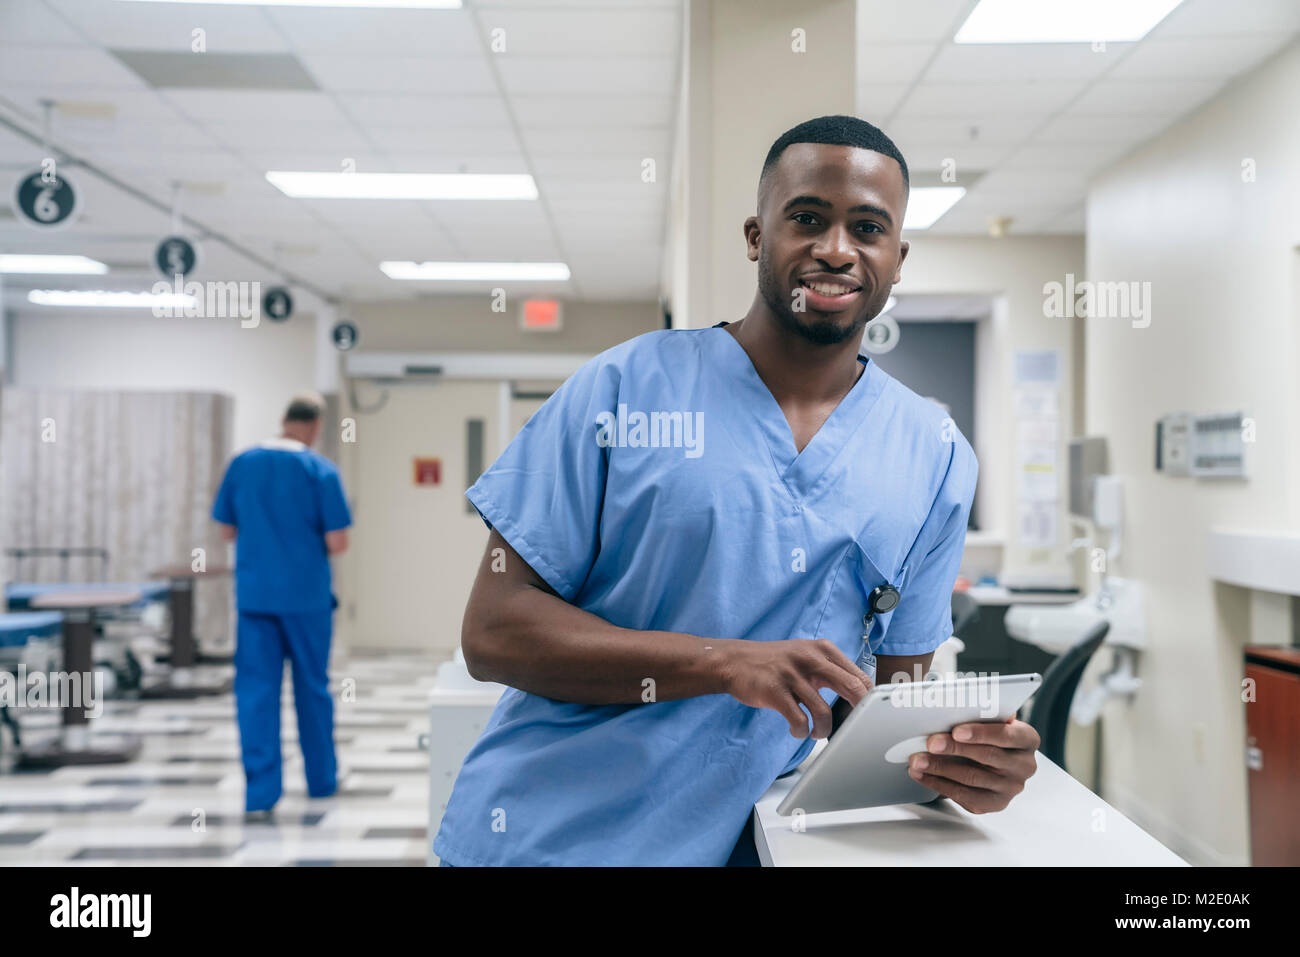 Portrait of smiling doctor using digital tablet in hospital Stock Photo